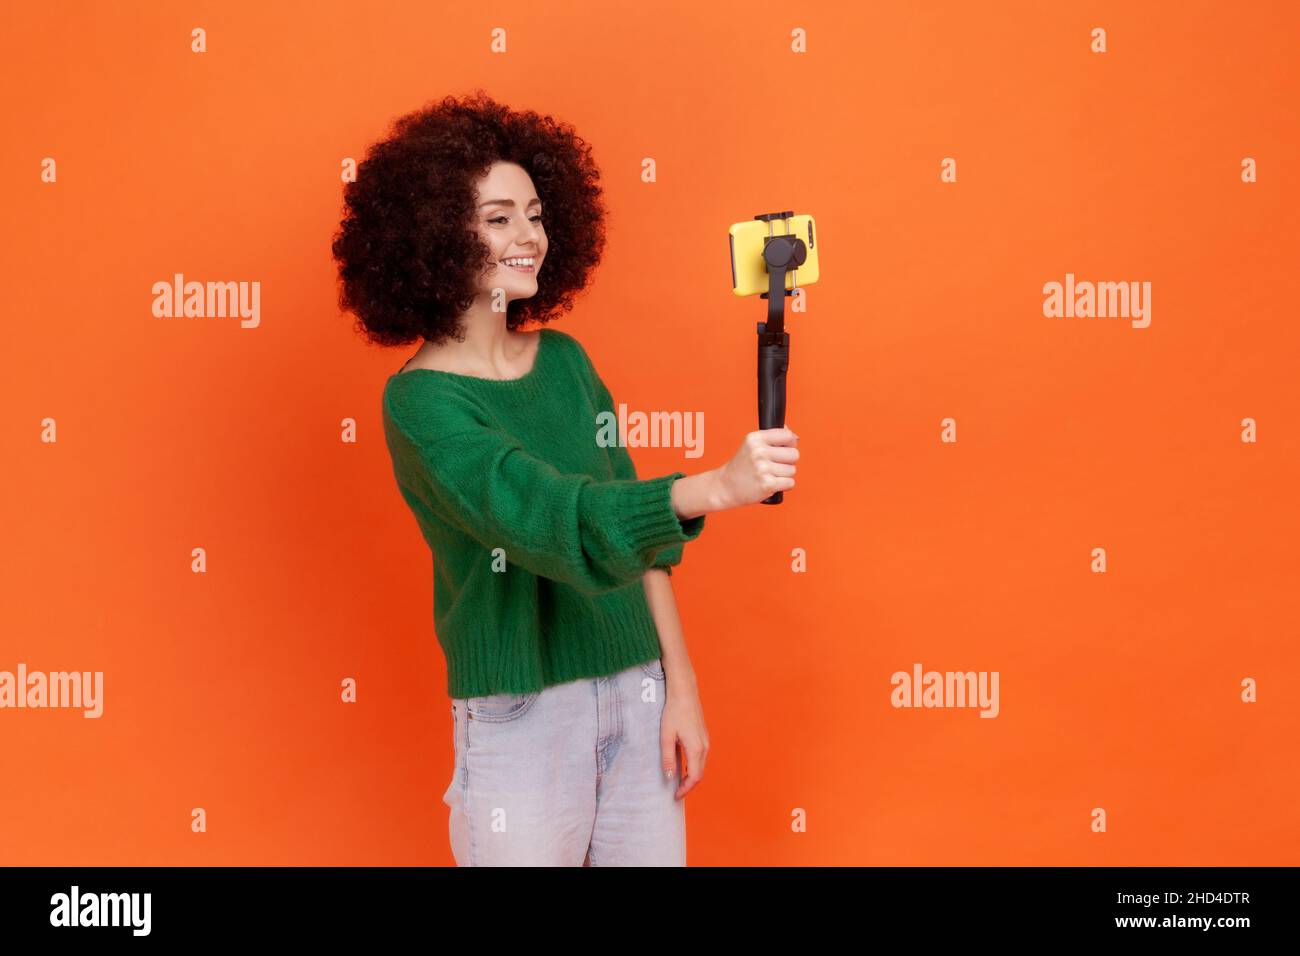 Side view portrait of woman with Afro hairstyle wearing green casual style sweater talking to her followers, online conversation, livestream. Indoor studio shot isolated on orange background. Stock Photo